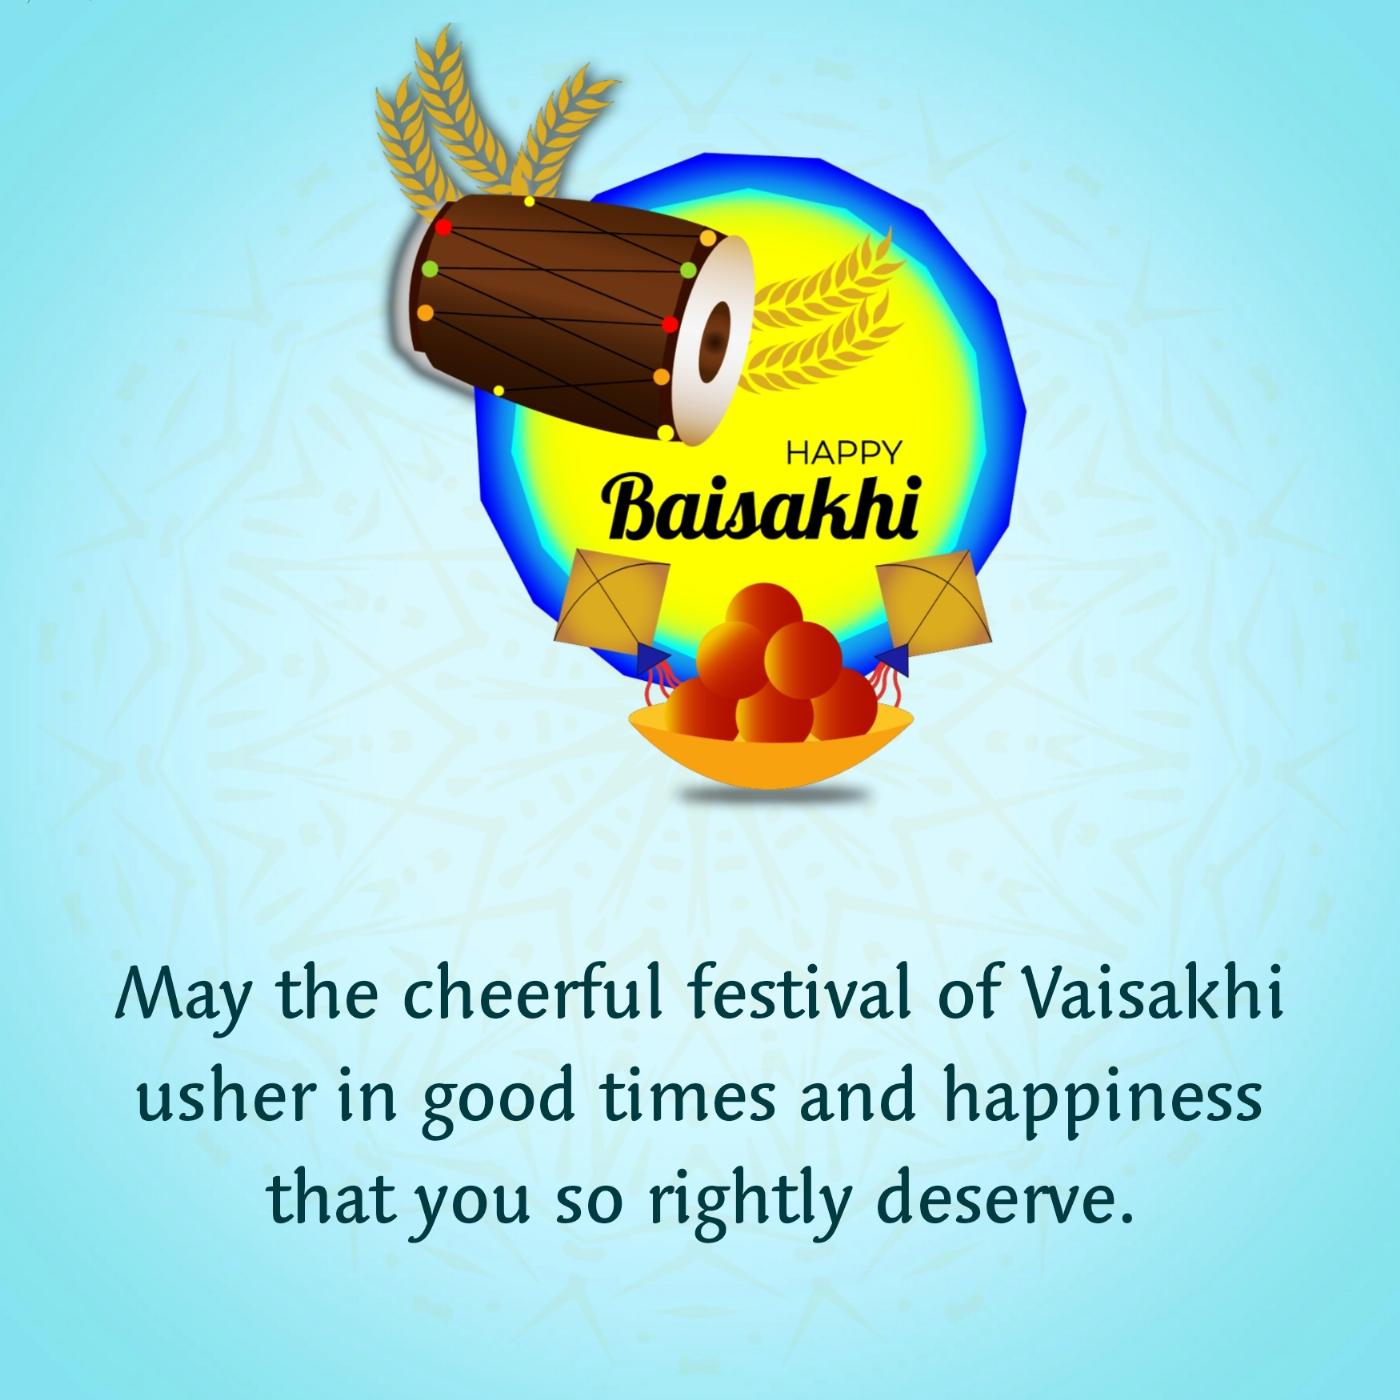 May the cheerful festival of Vaisakhi usher in good times